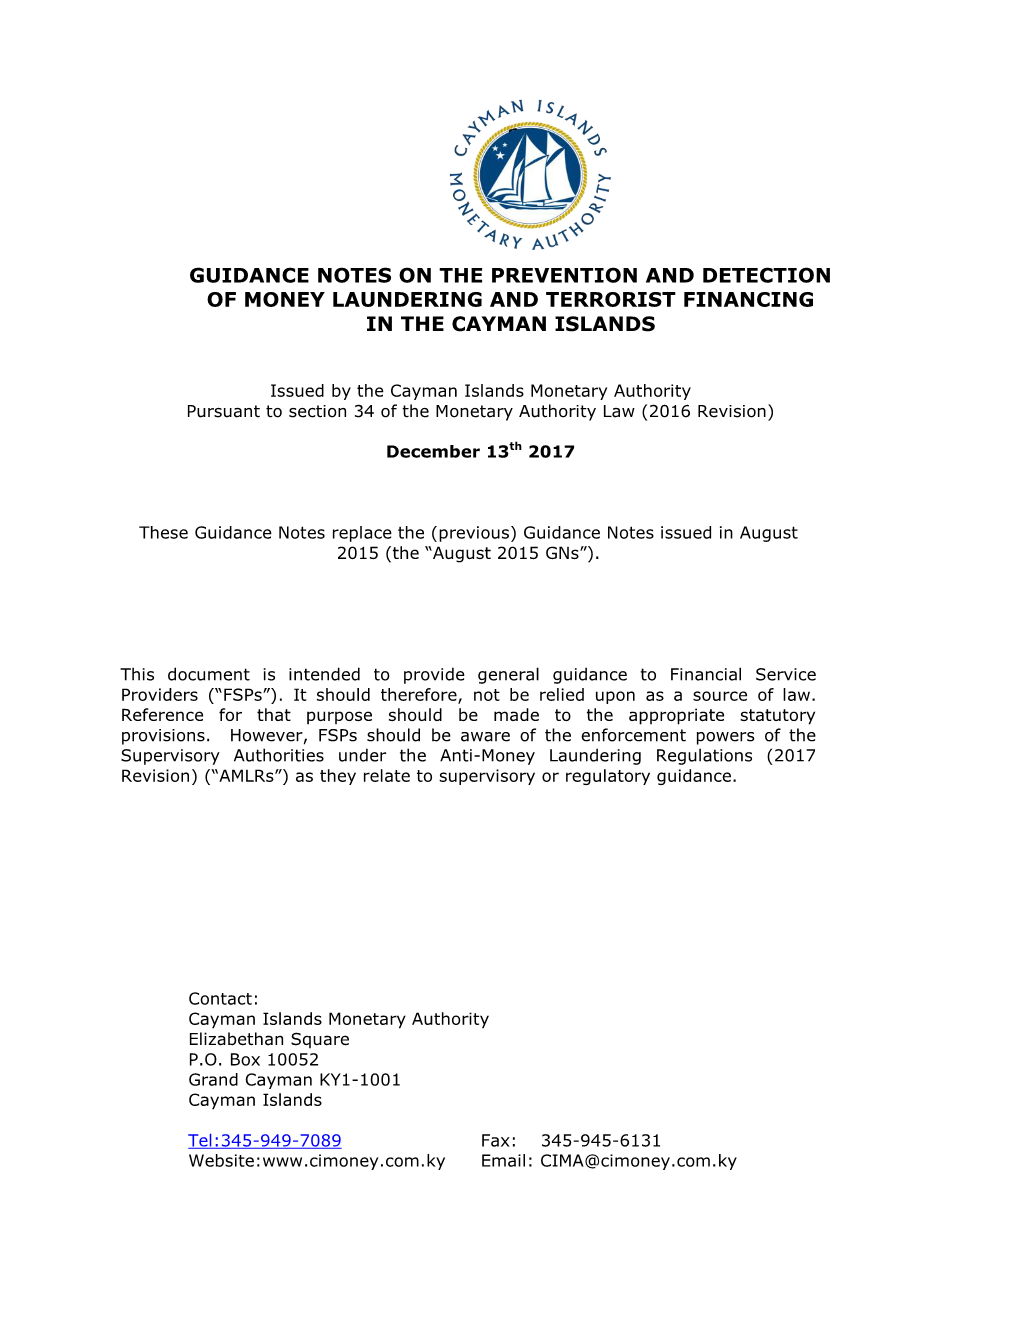 Guidance Notes on the Prevention and Detection of Money Laundering and Terrorist Financing in the Cayman Islands